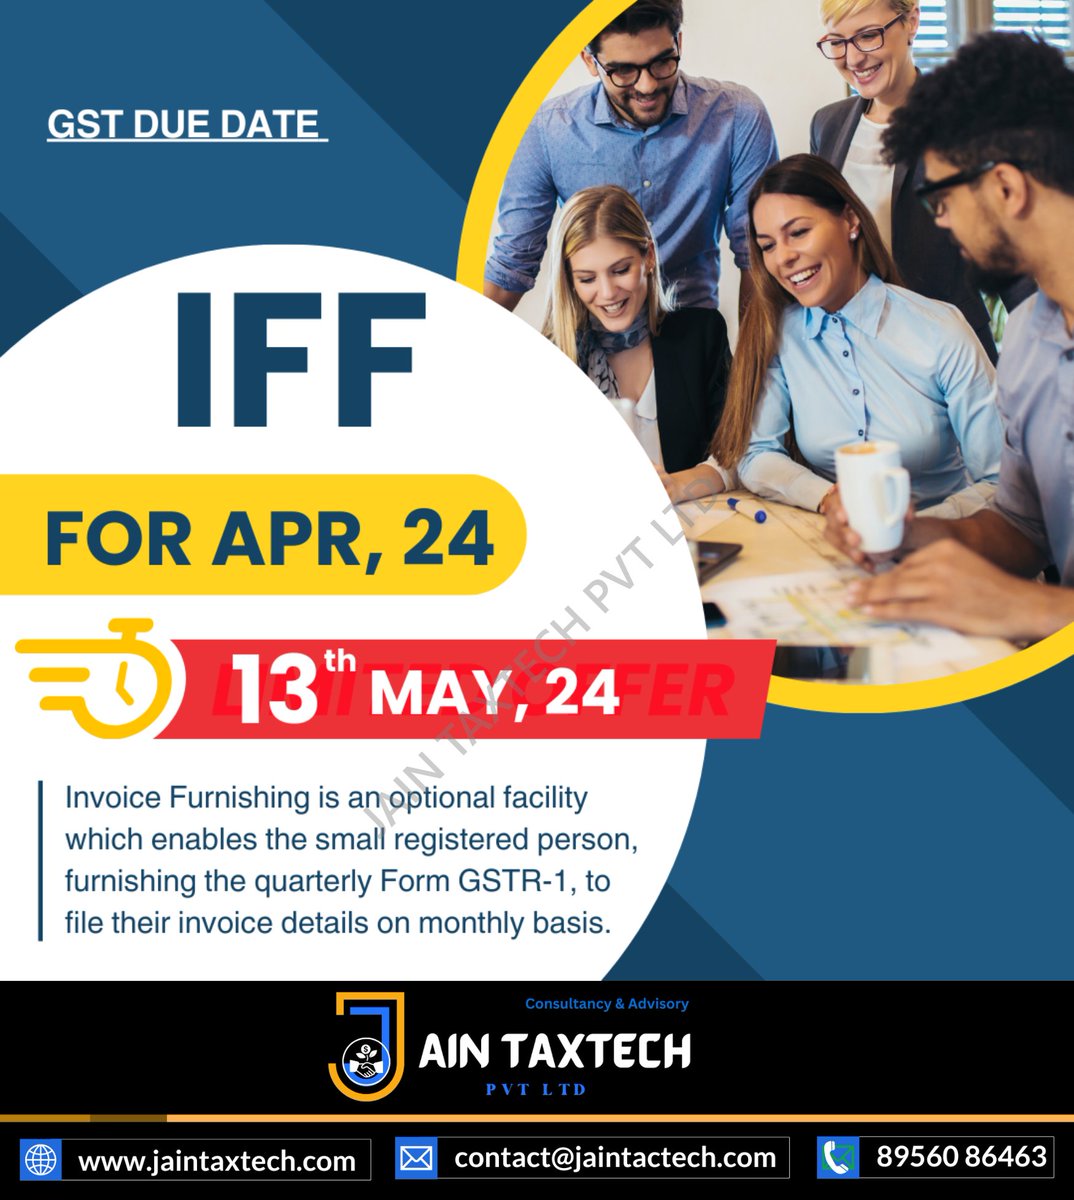 Take Advantage of IFF - Invoice Furnishing Facility! 📝✨ Small registered persons filing quarterly GSTR-1 can now submit invoice details monthly. Simplify your compliance with Jain TaxTech! 💼📅 #IFF #InvoiceFurnishing #TaxCompliance #JainTaxTech #GSTFiling #BusinessGrowth